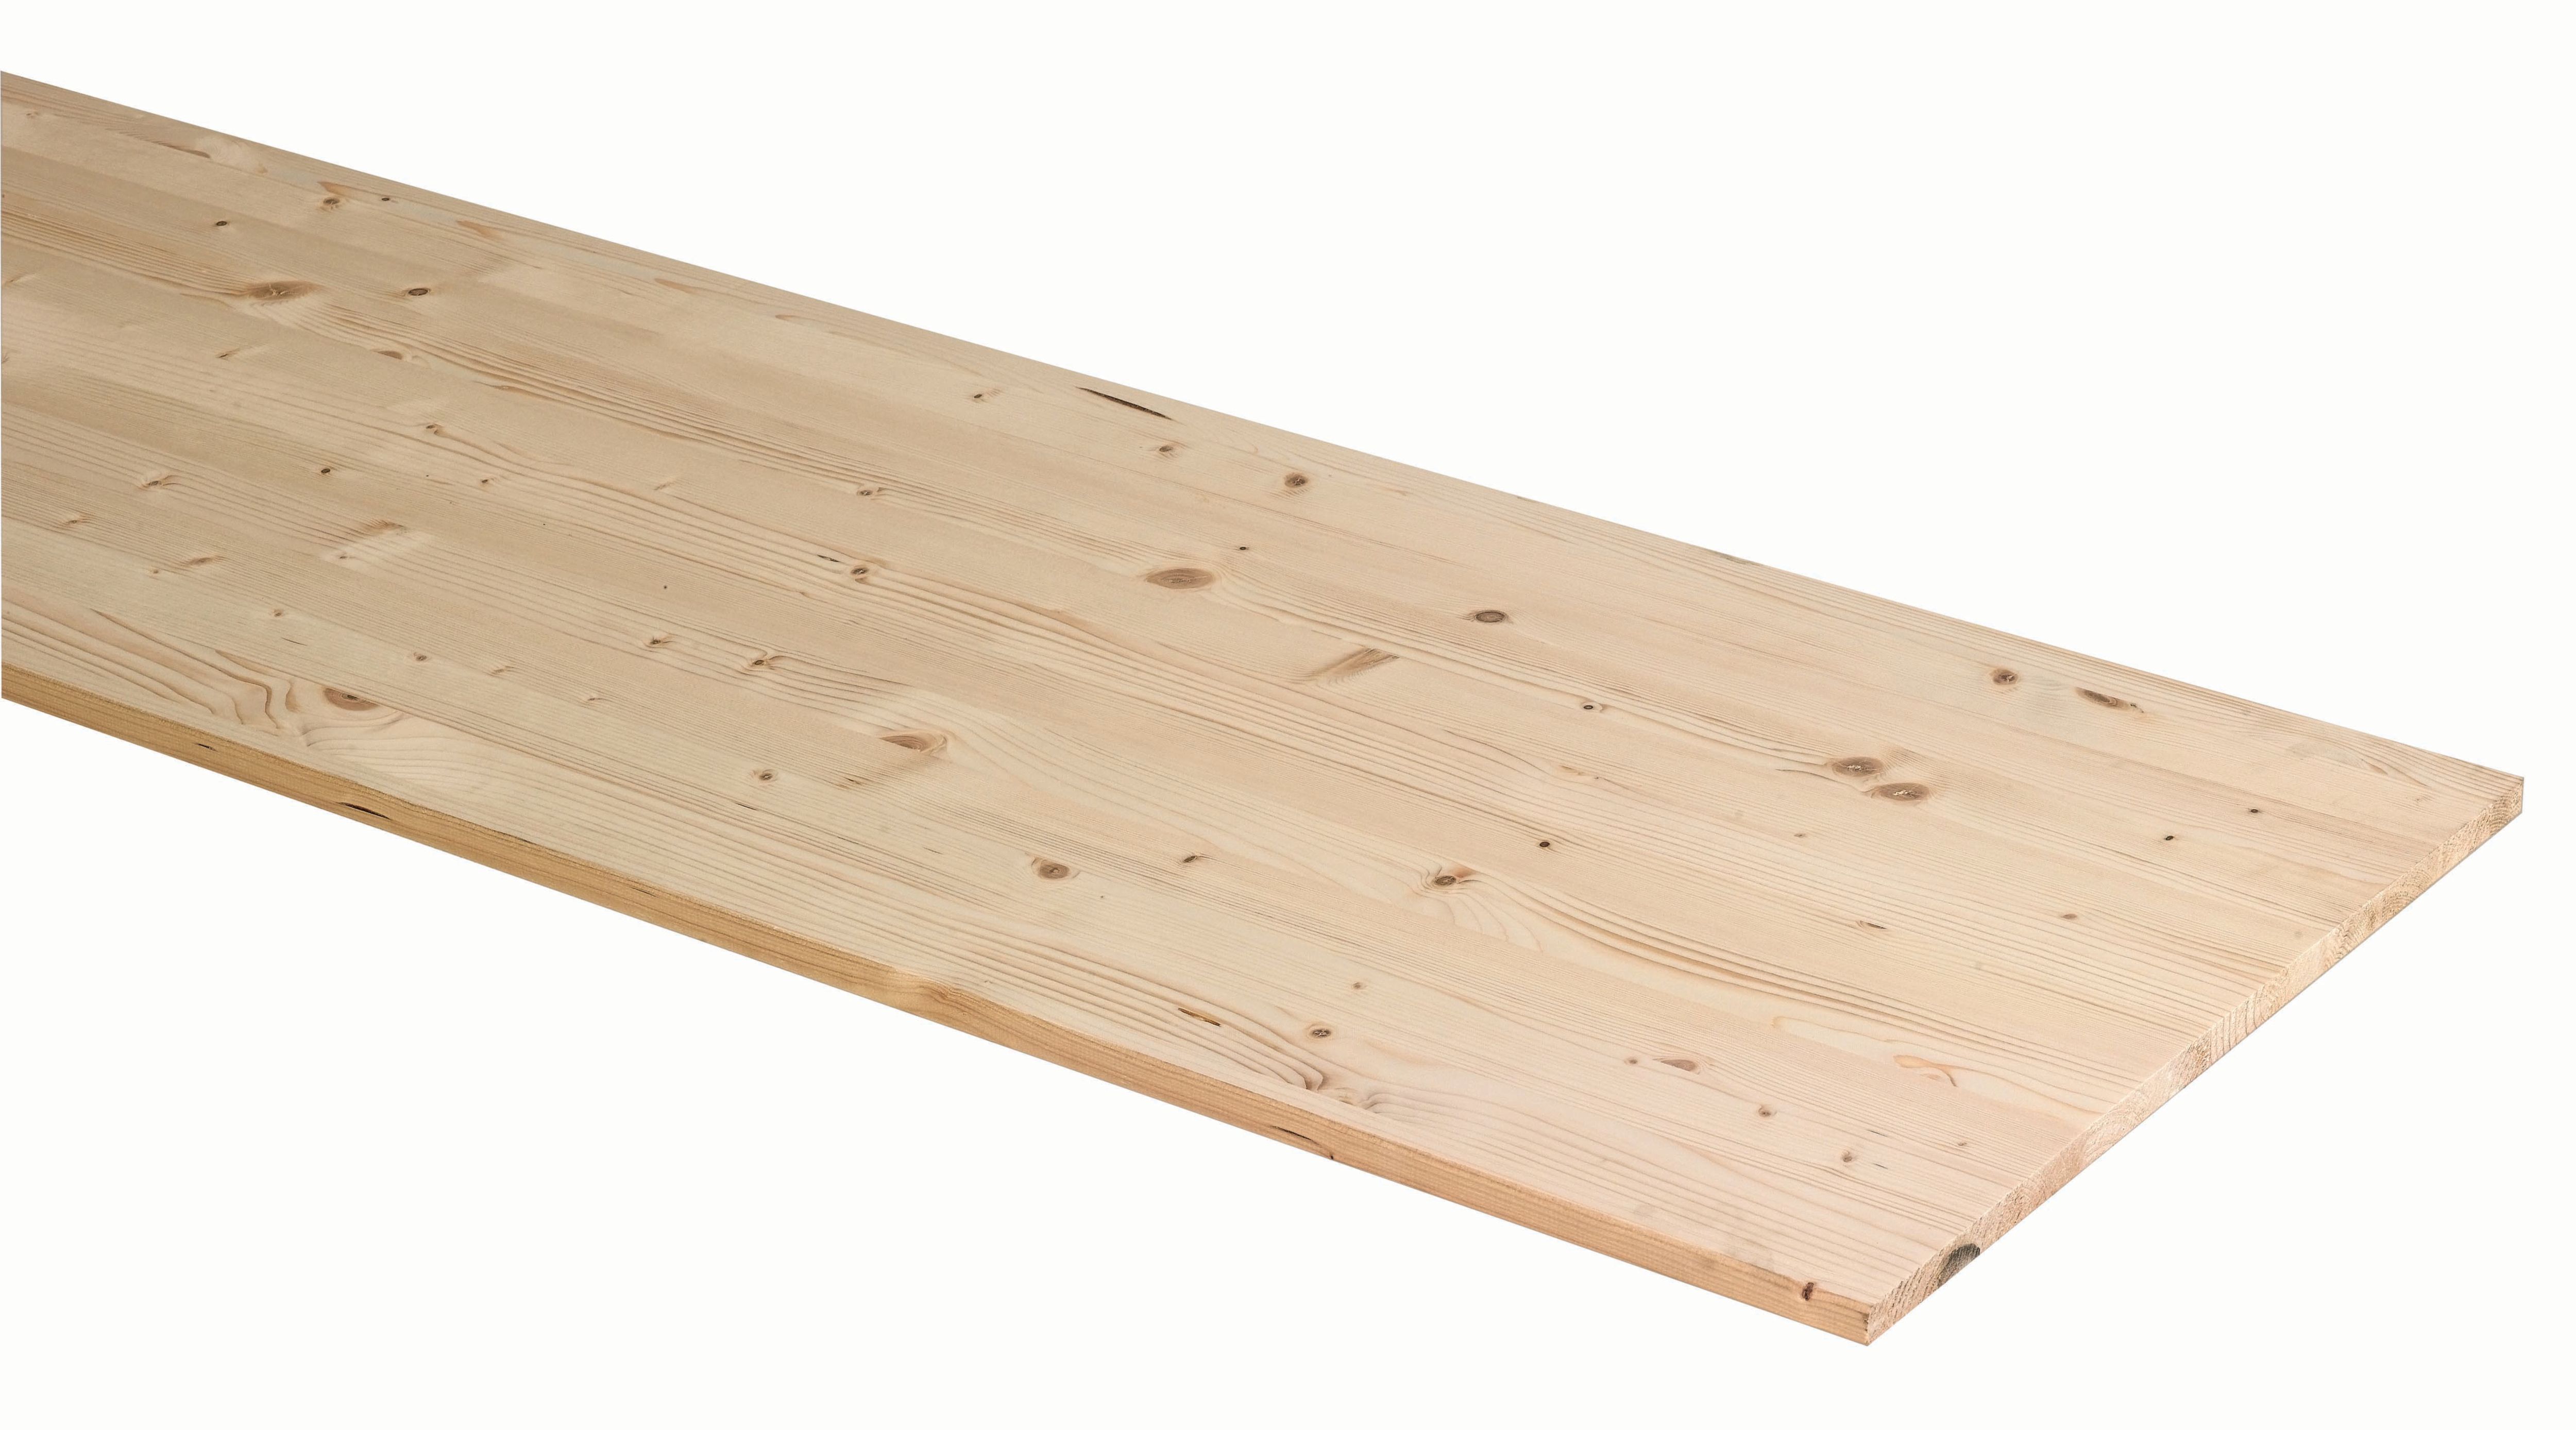 Image of Wickes General Purpose Spruce Timberboard - 18mm x 200mm x 1750mm